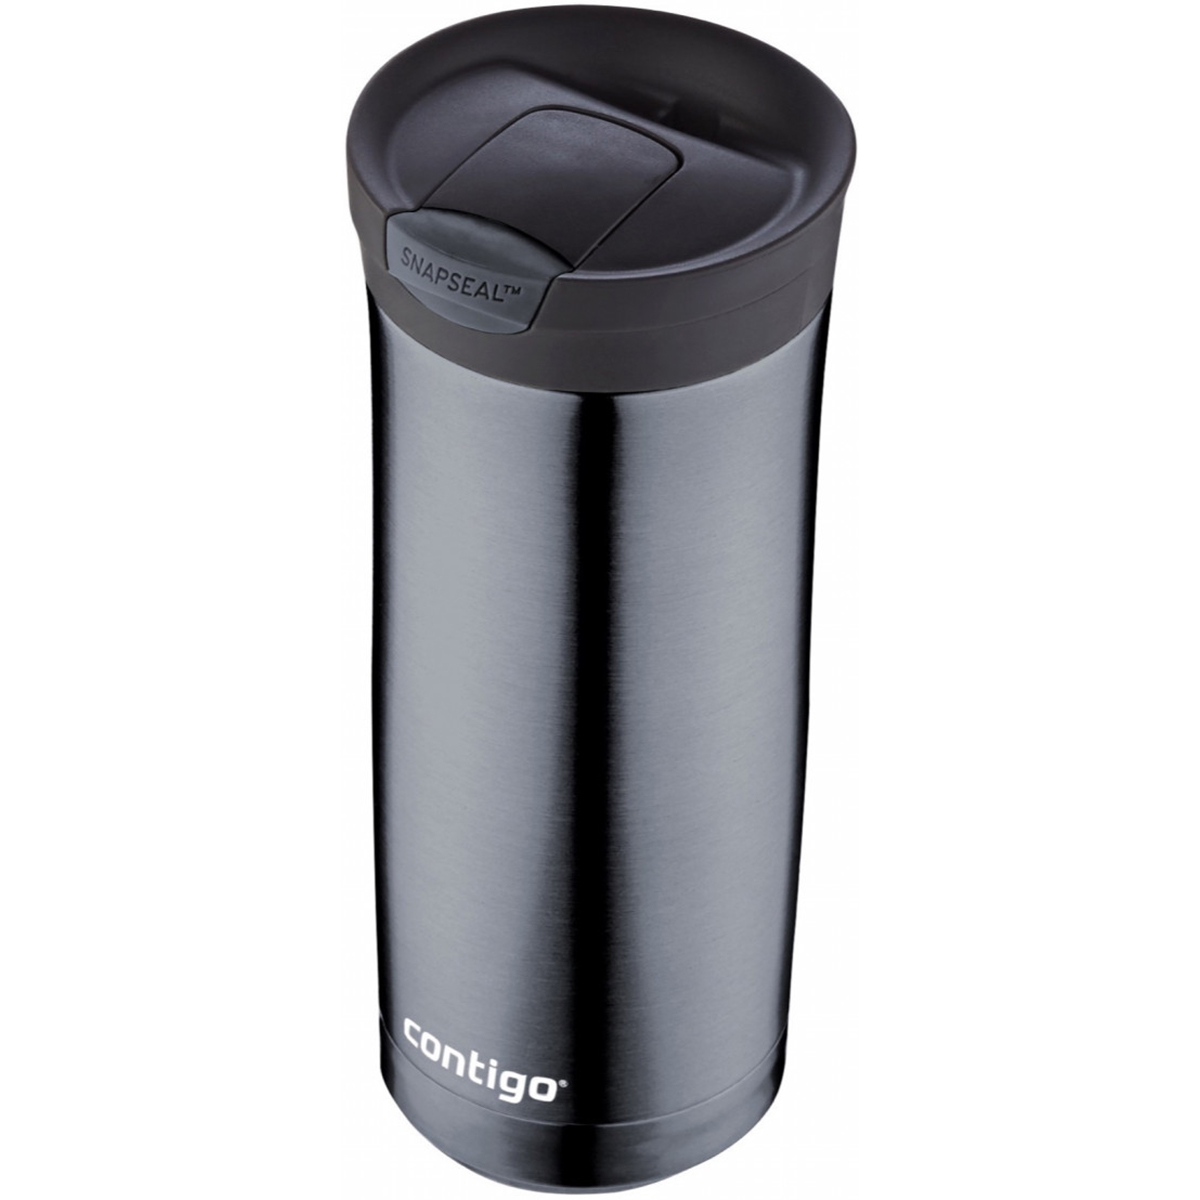 Contigo Byron Stainless Steel Travel Mug with SNAPSEAL Lid Purple Radiant Orchid, 16 fl oz. - image 2 of 2